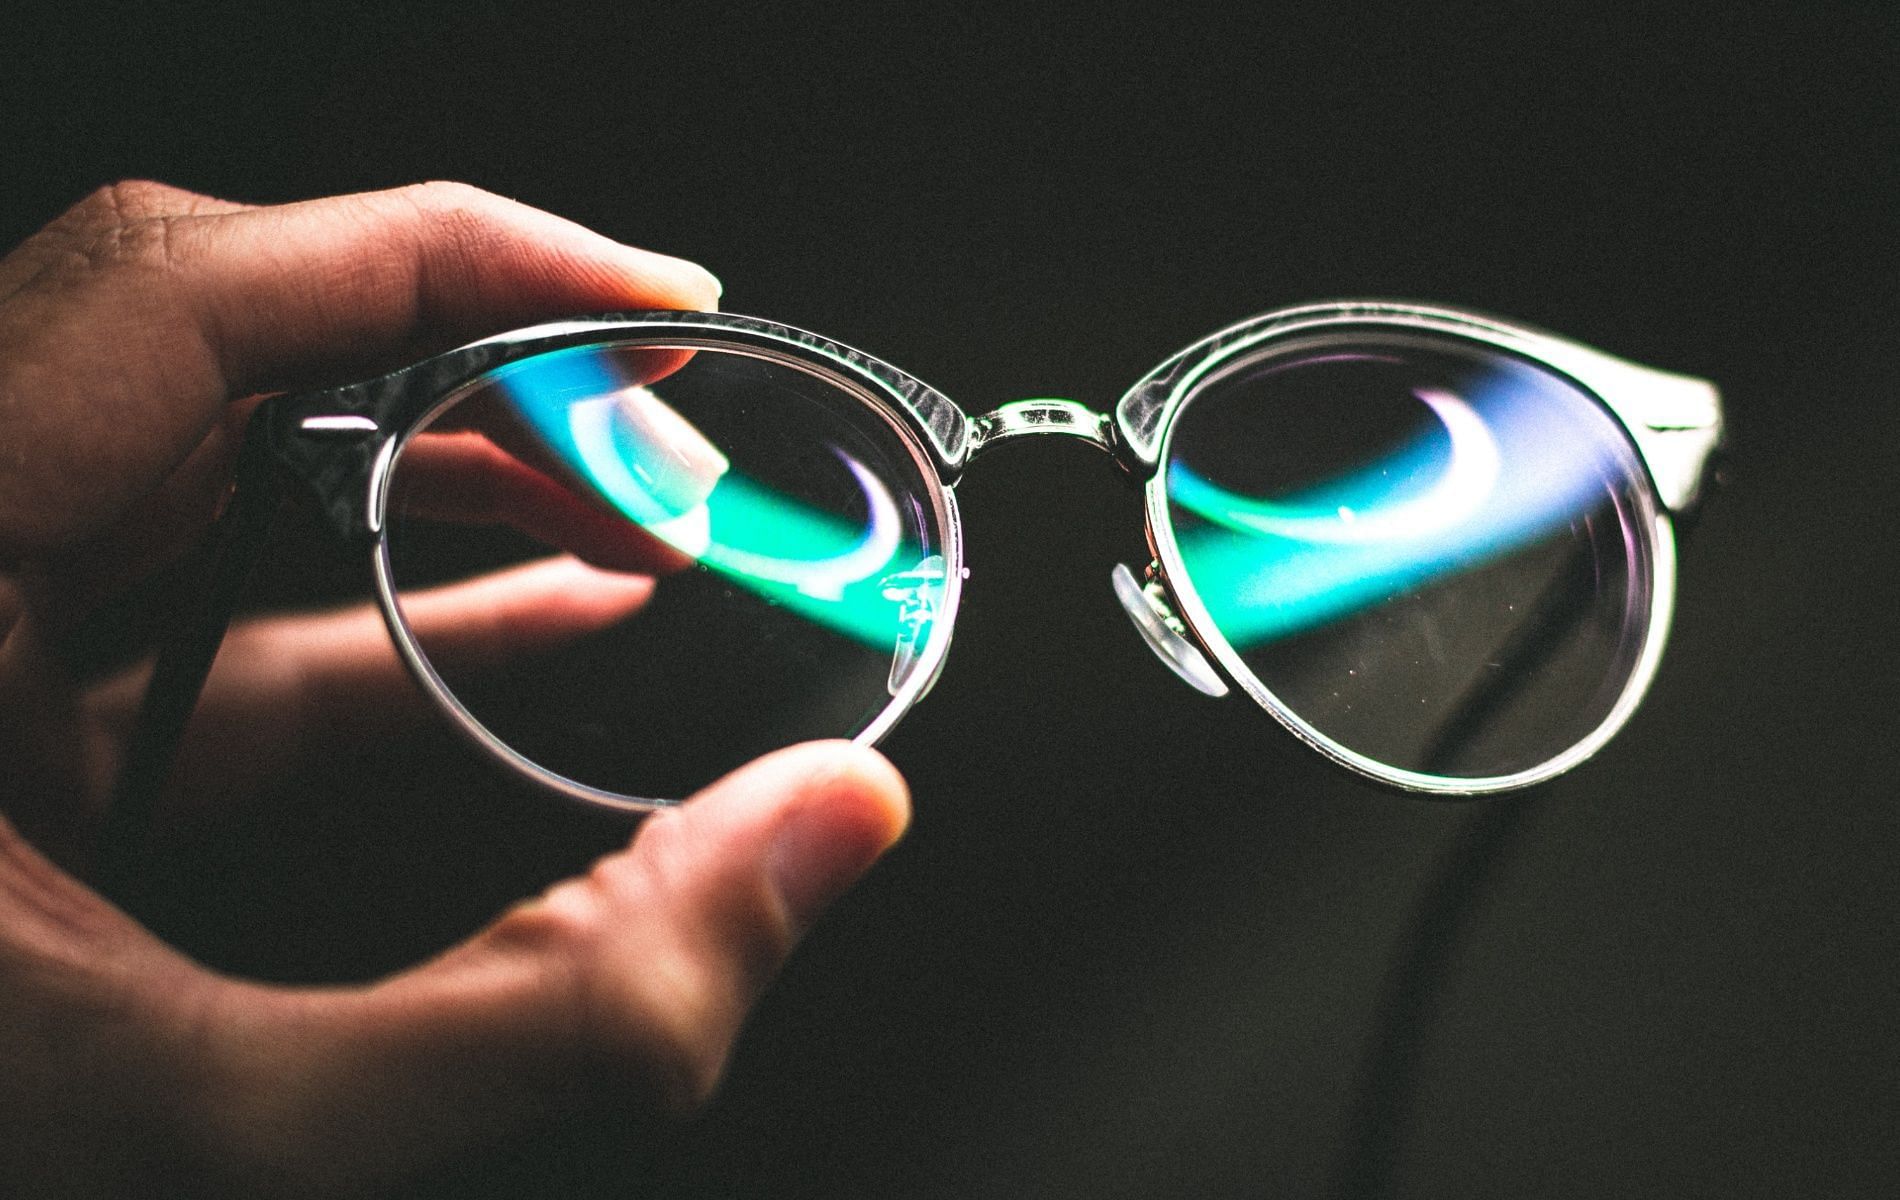 Blue-Light Glasses Debunked? New Study Casts Doubt on Eye Strain and Sleep  Claims